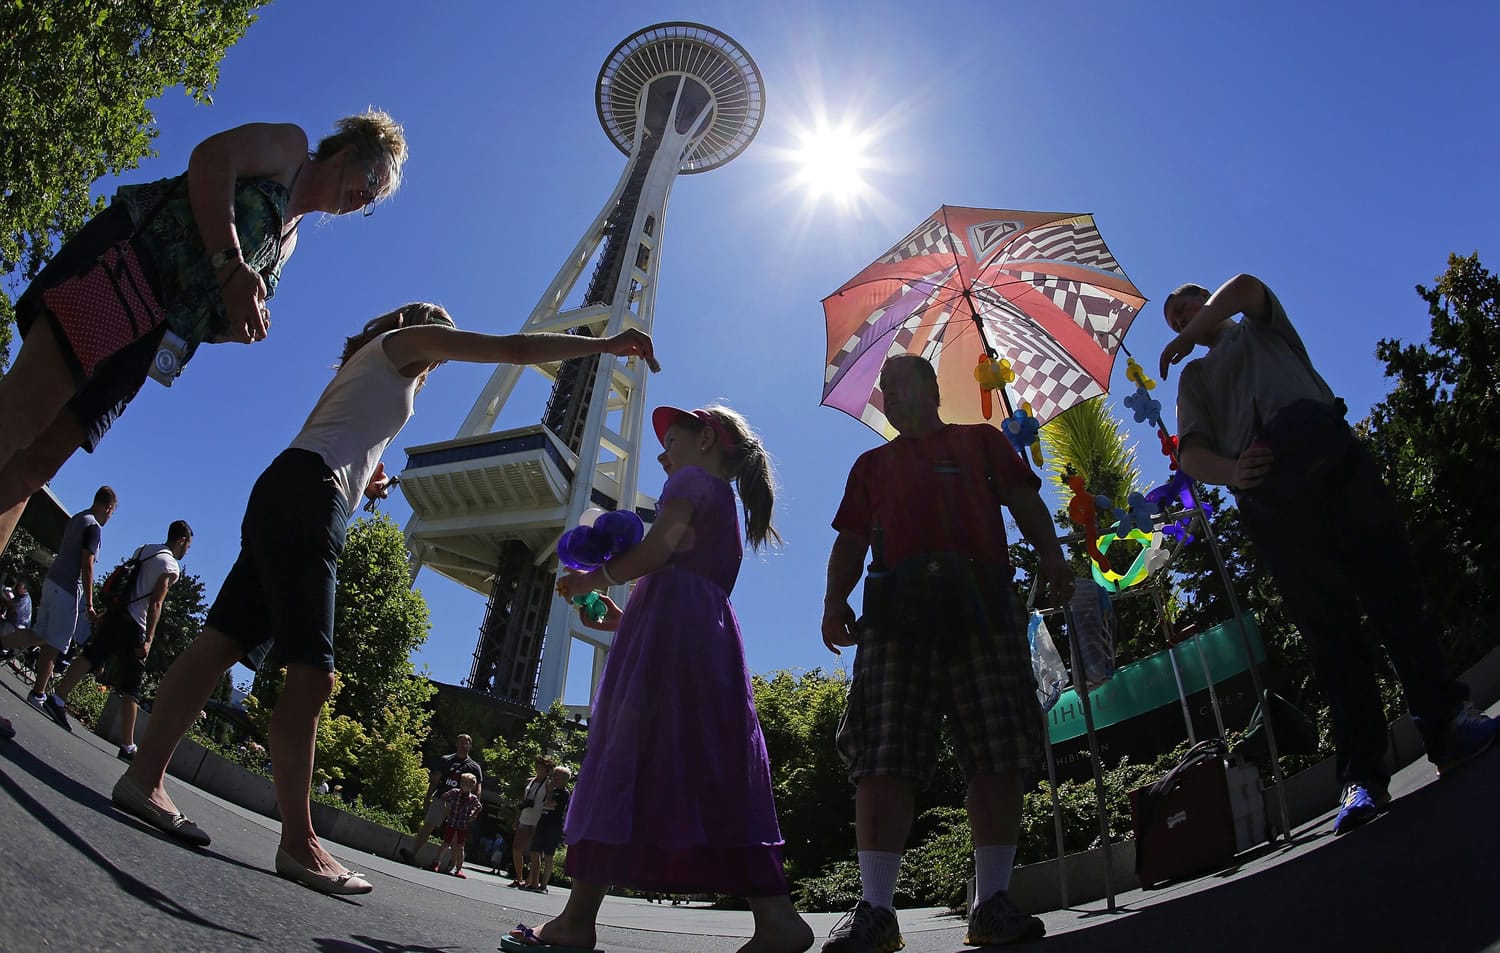 Kevin Pinnell, second from right, shows Wednesday that people in Seattle don't just need umbrellas during the rainy season as he stands under his for shade from the sun.